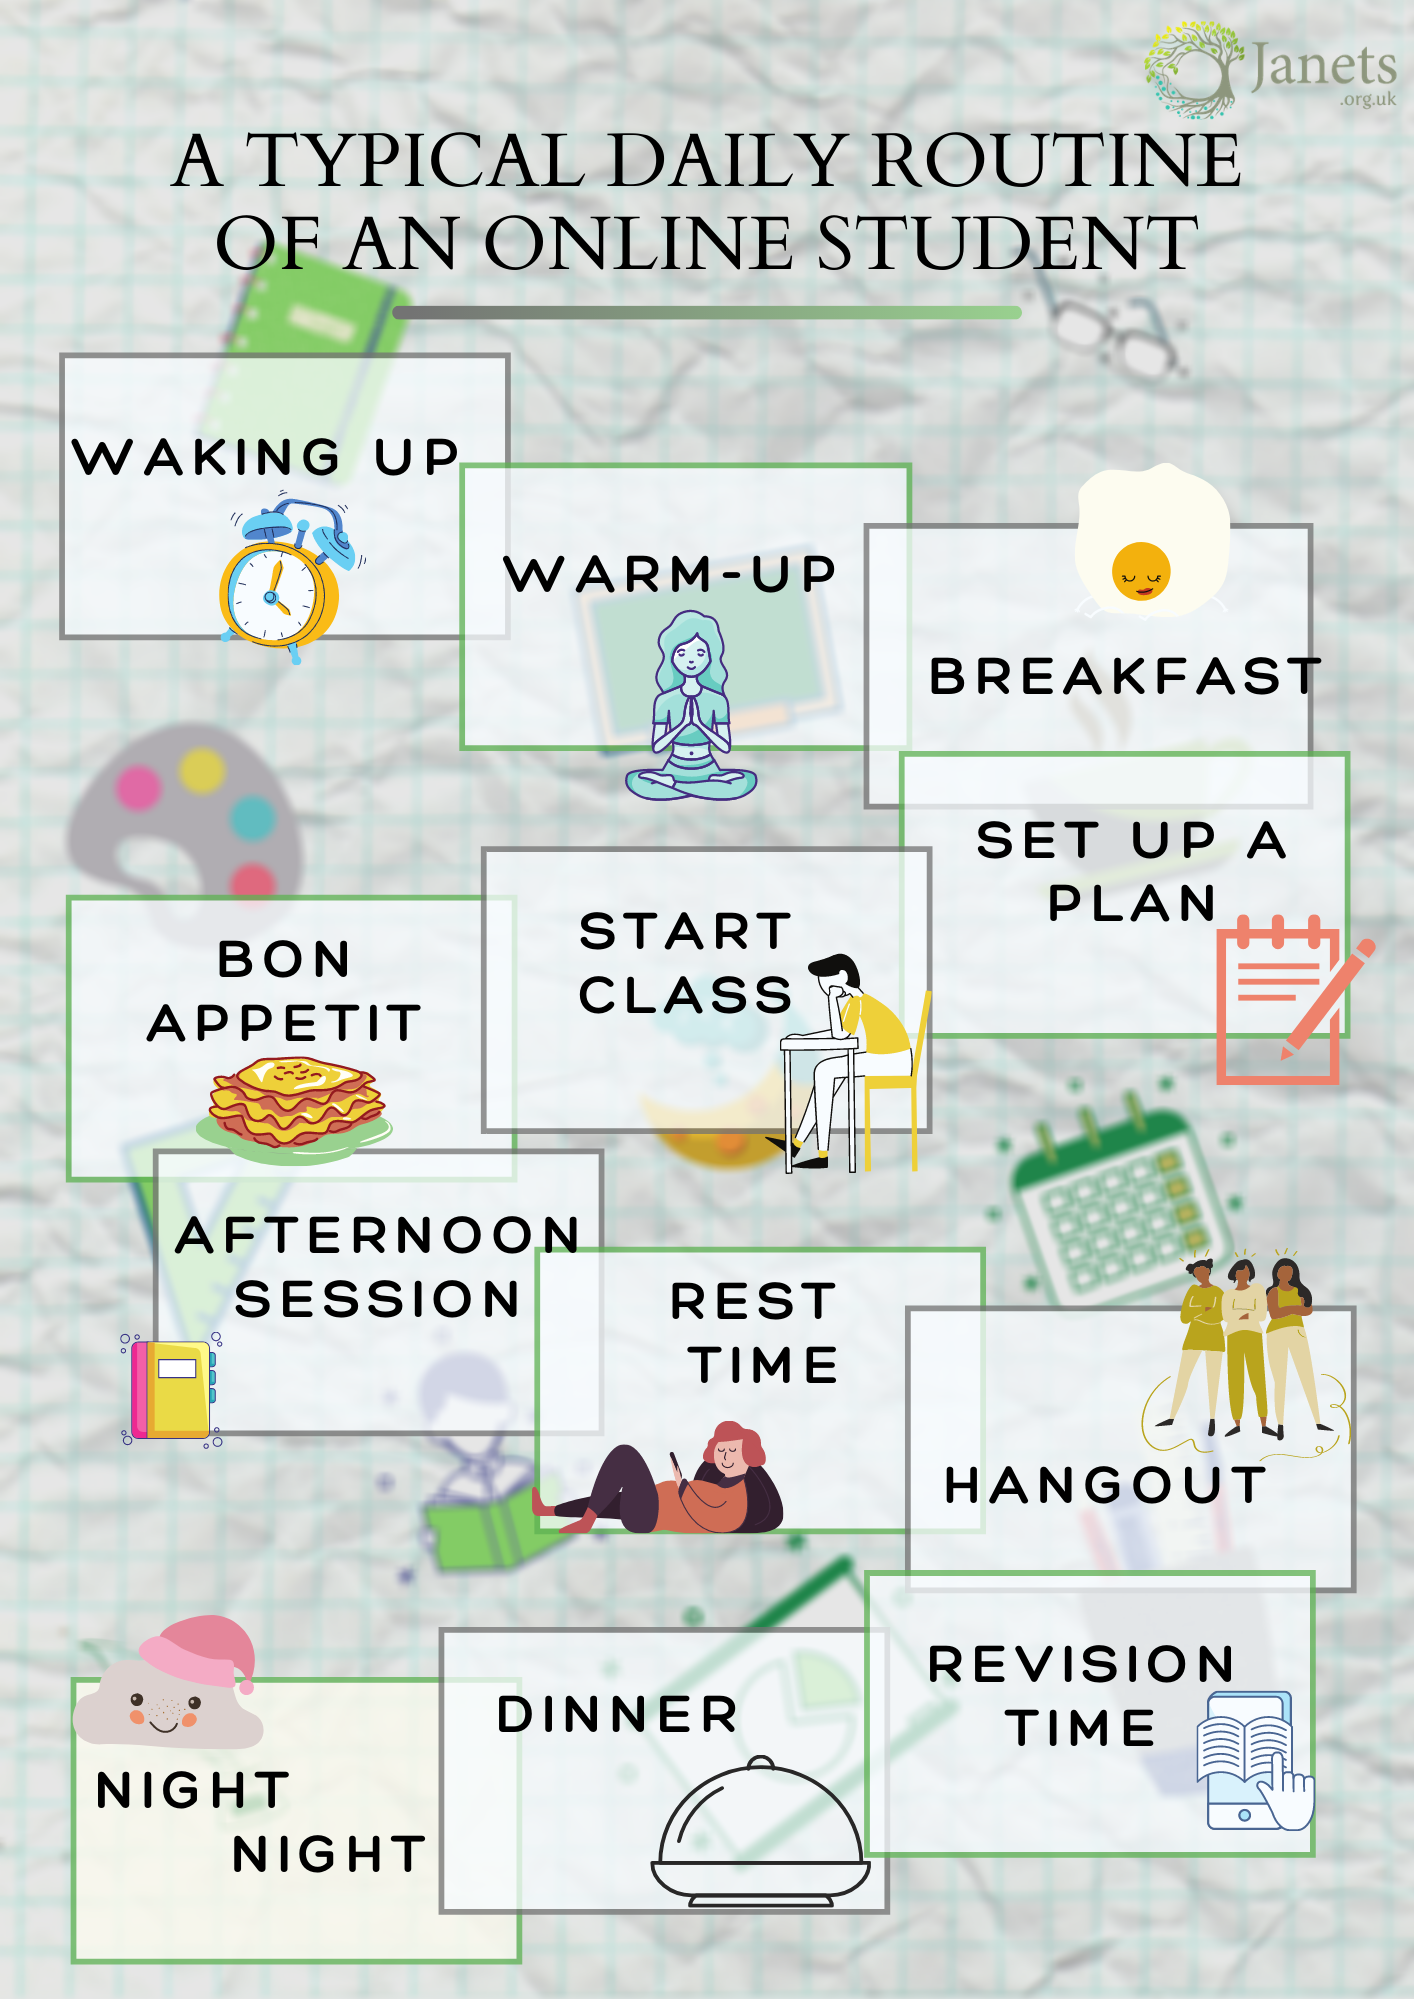 Info-graphic showing typical daily routine of an online student